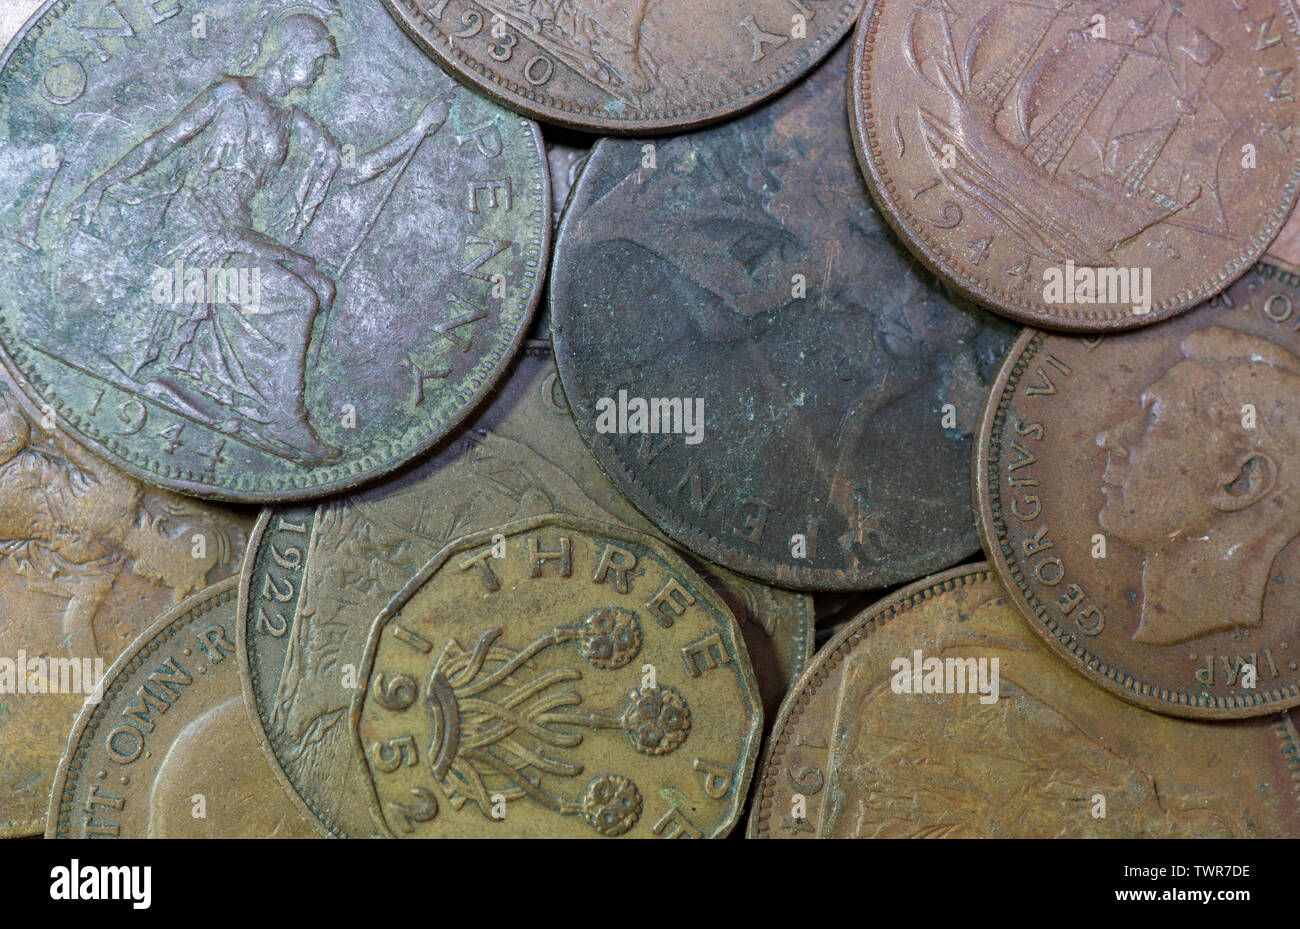 Old British coins, one penny coins. threepenny bit,halfpenny and sixpence. British Isles. Stock Photo